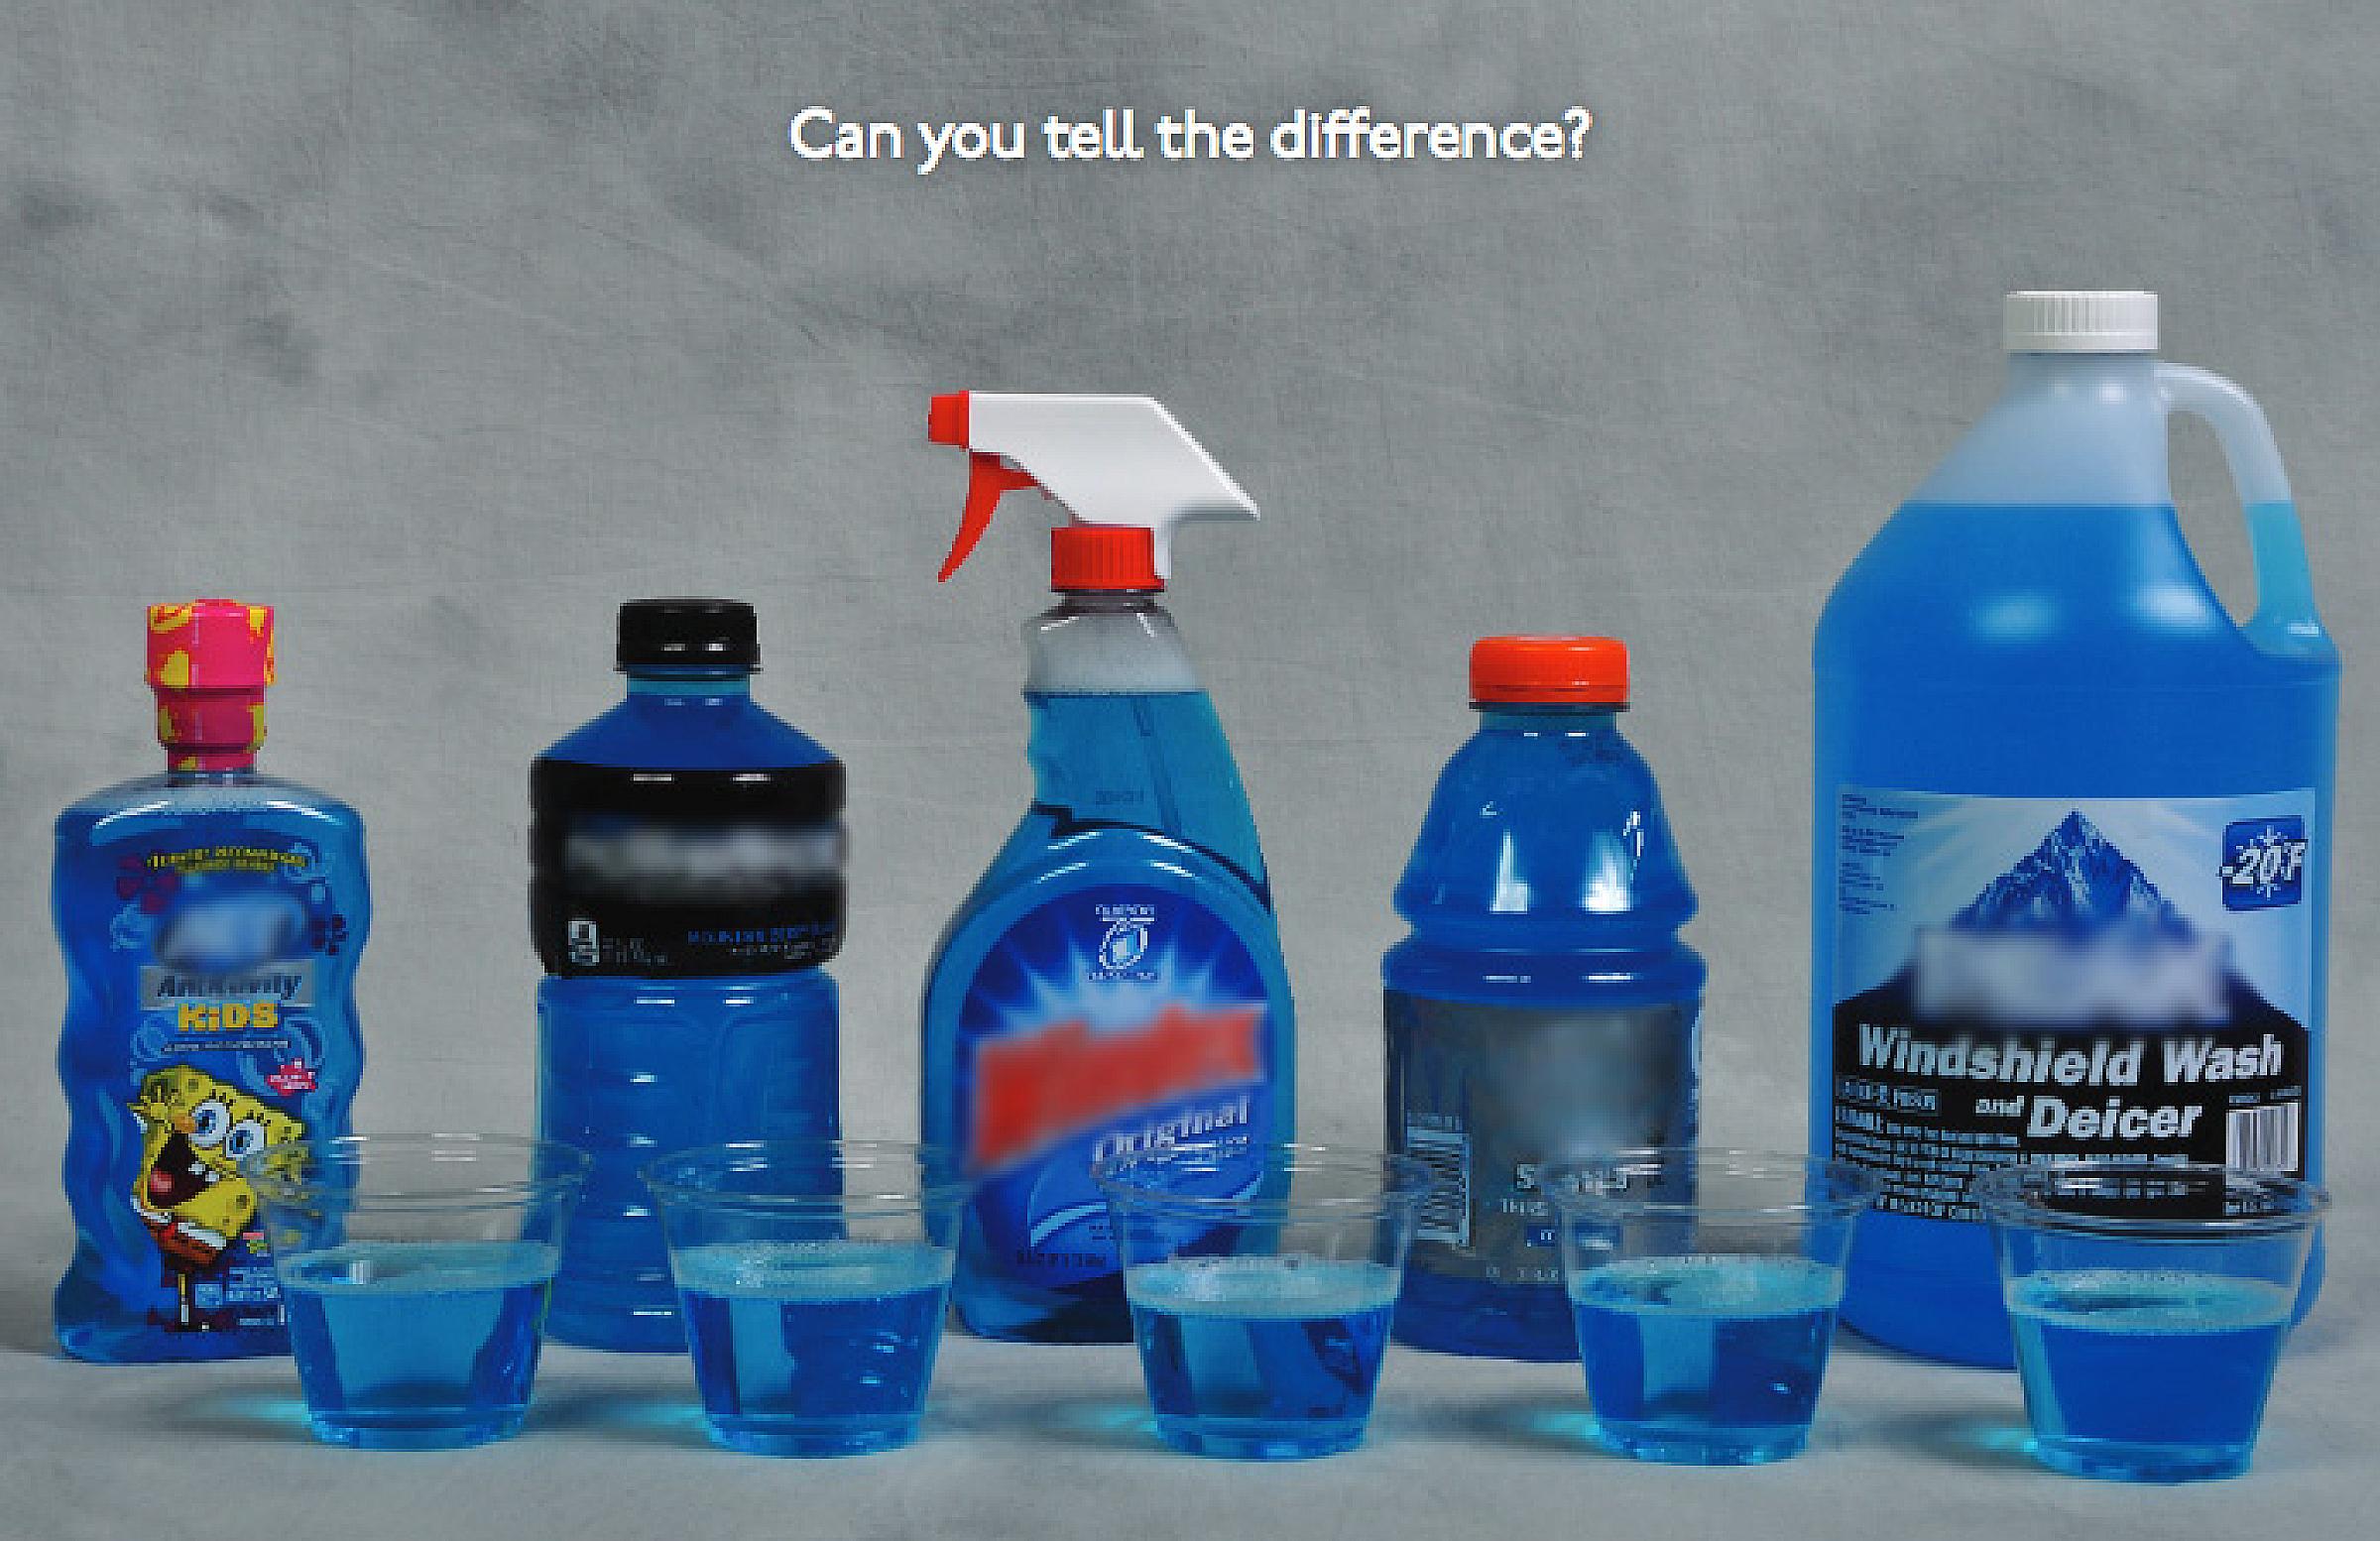 Blue look a like products showing you can't tell blue liquids apart when not labeled